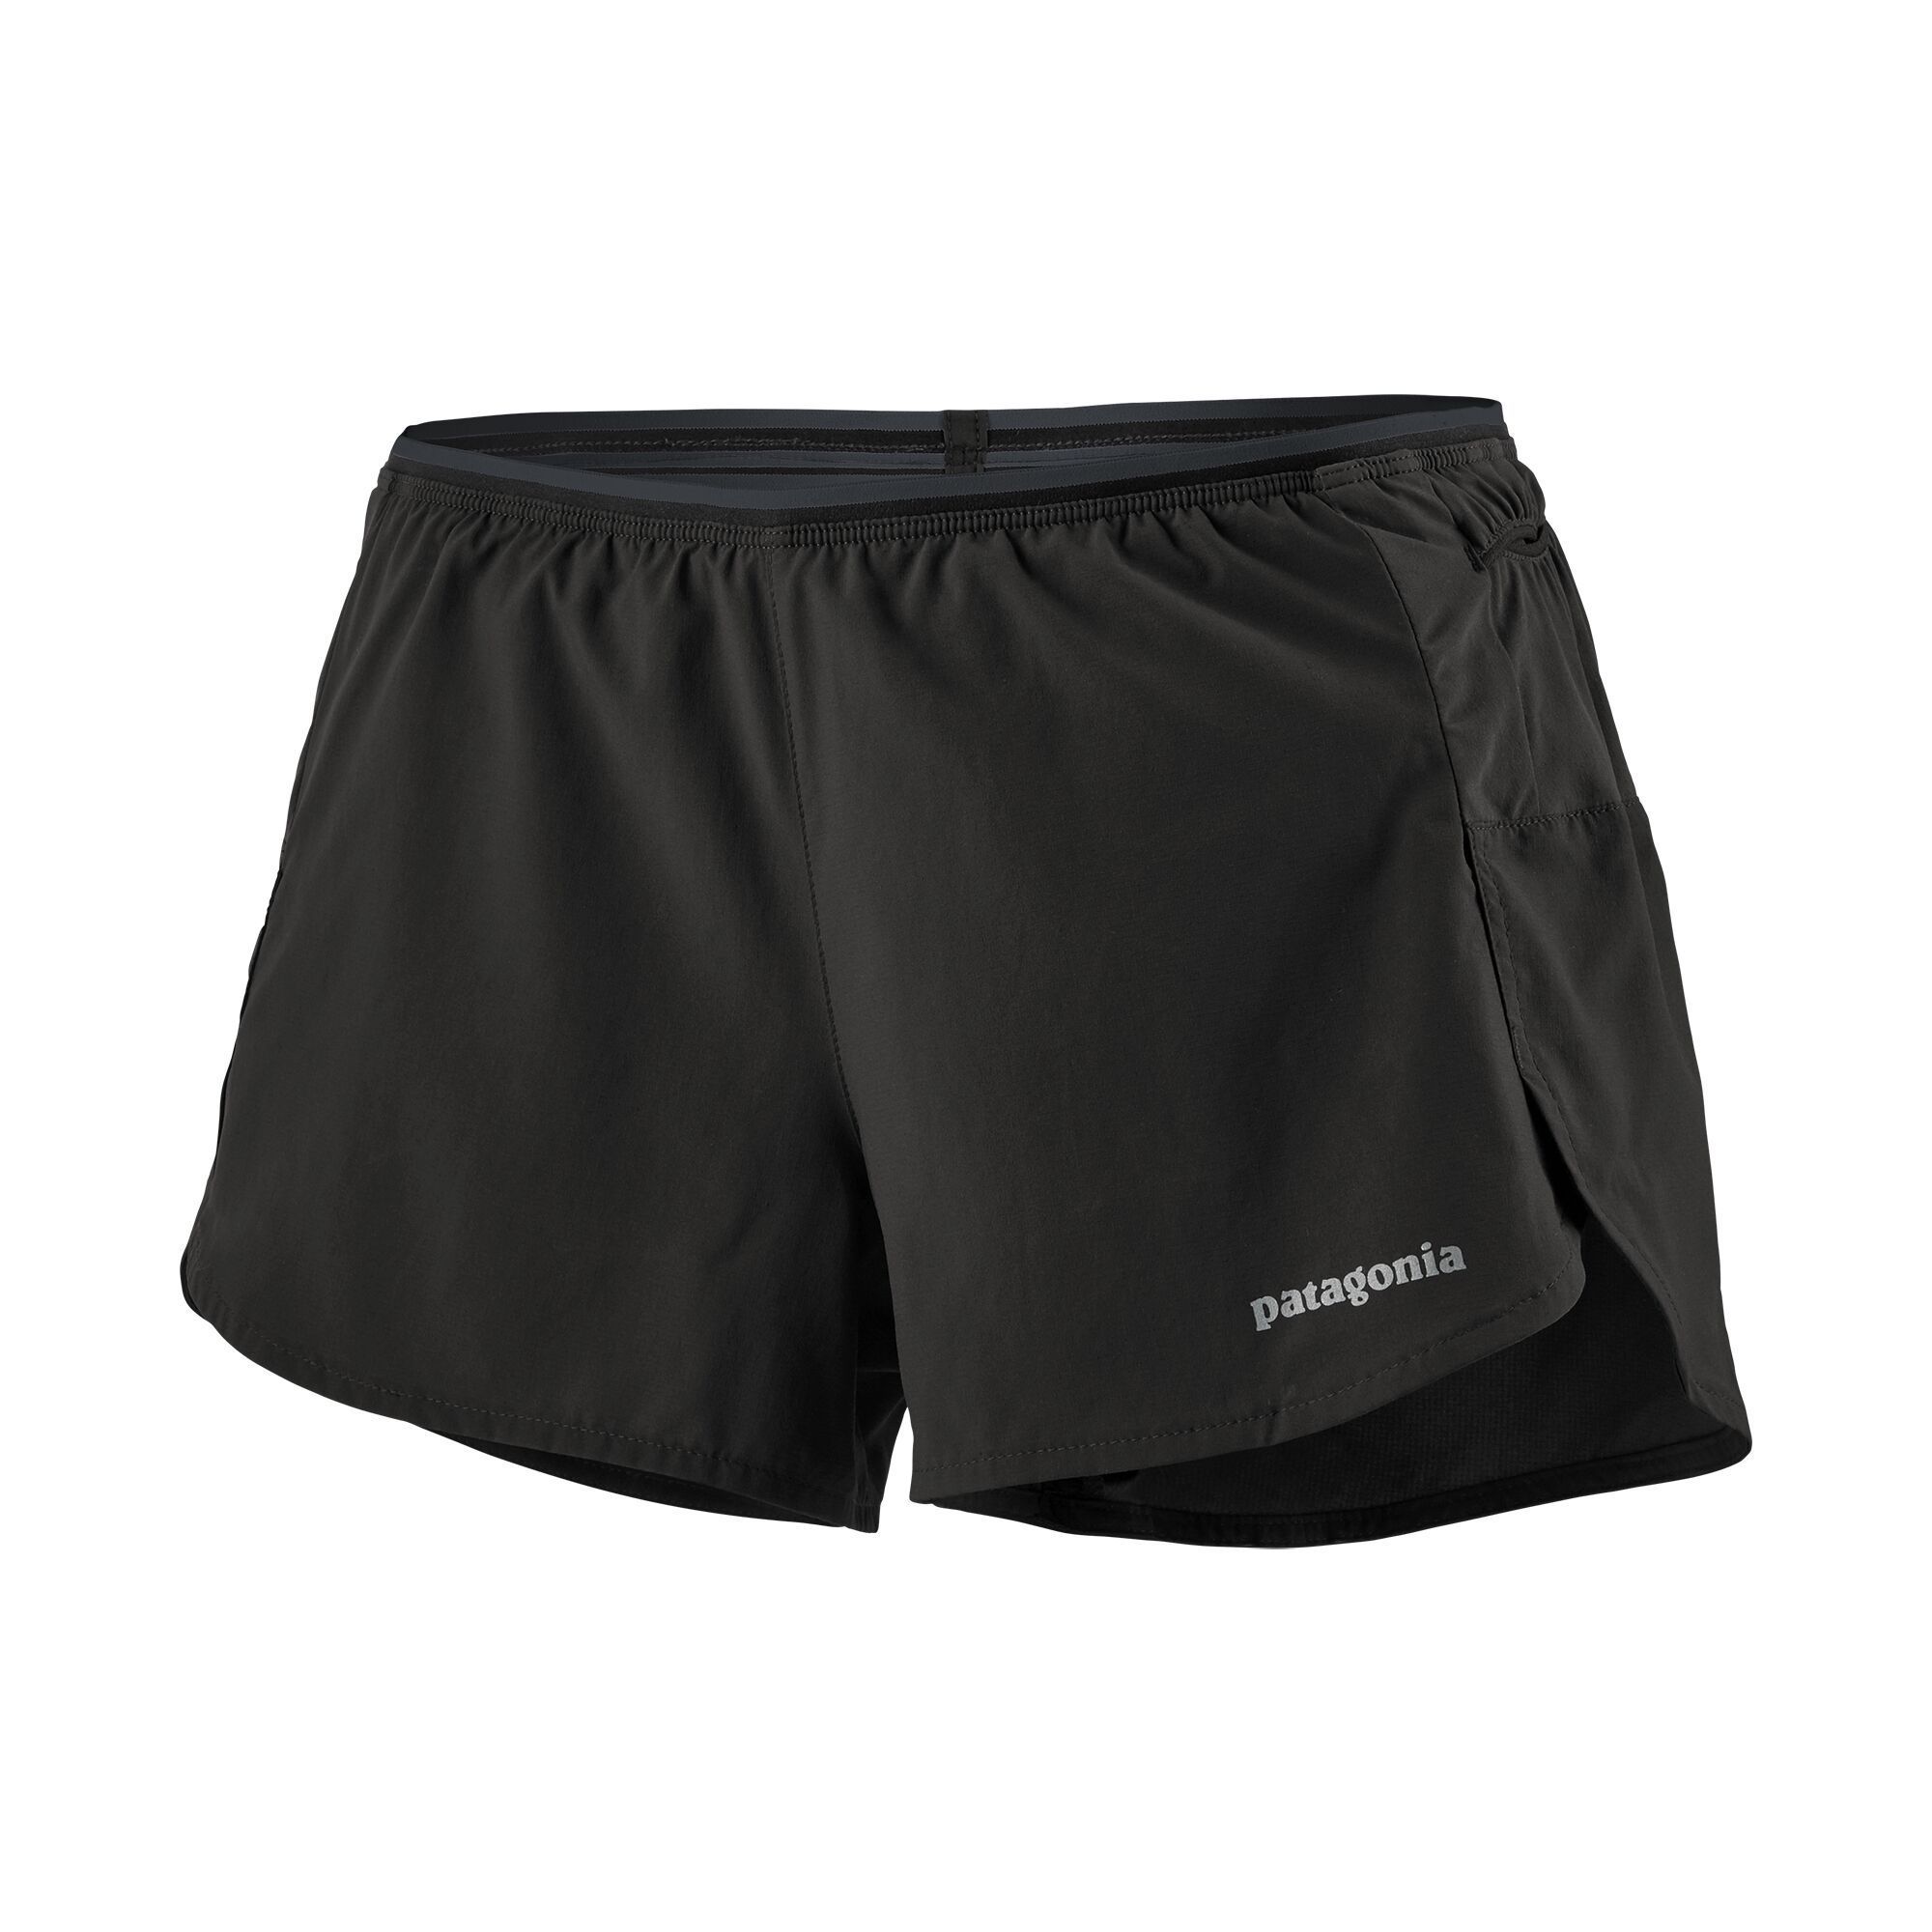 W's Strider Pro Running Shorts - 3" - Recycled Polyester - Black